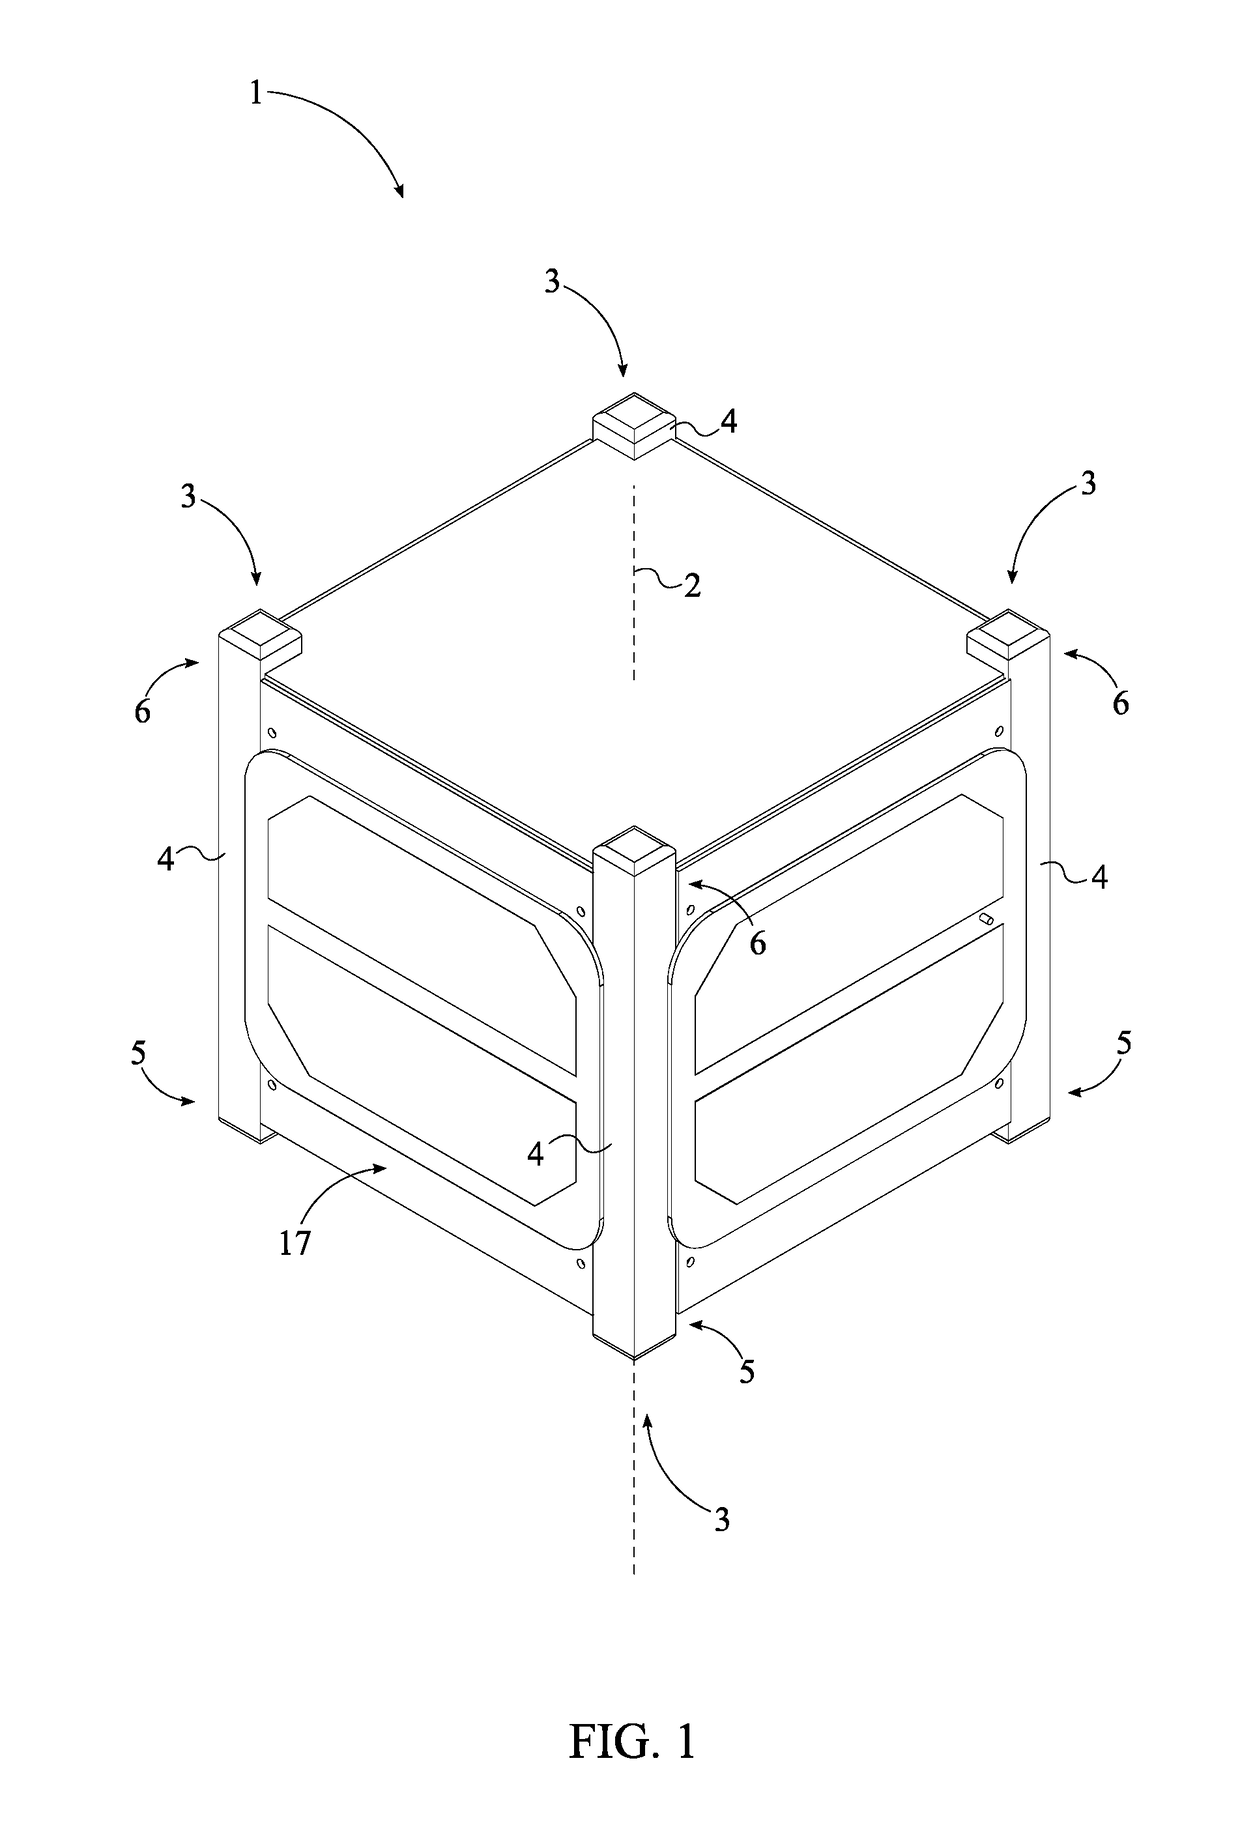 Modified Structural Frame for Storing Propulsion Fuel in a CubeSat